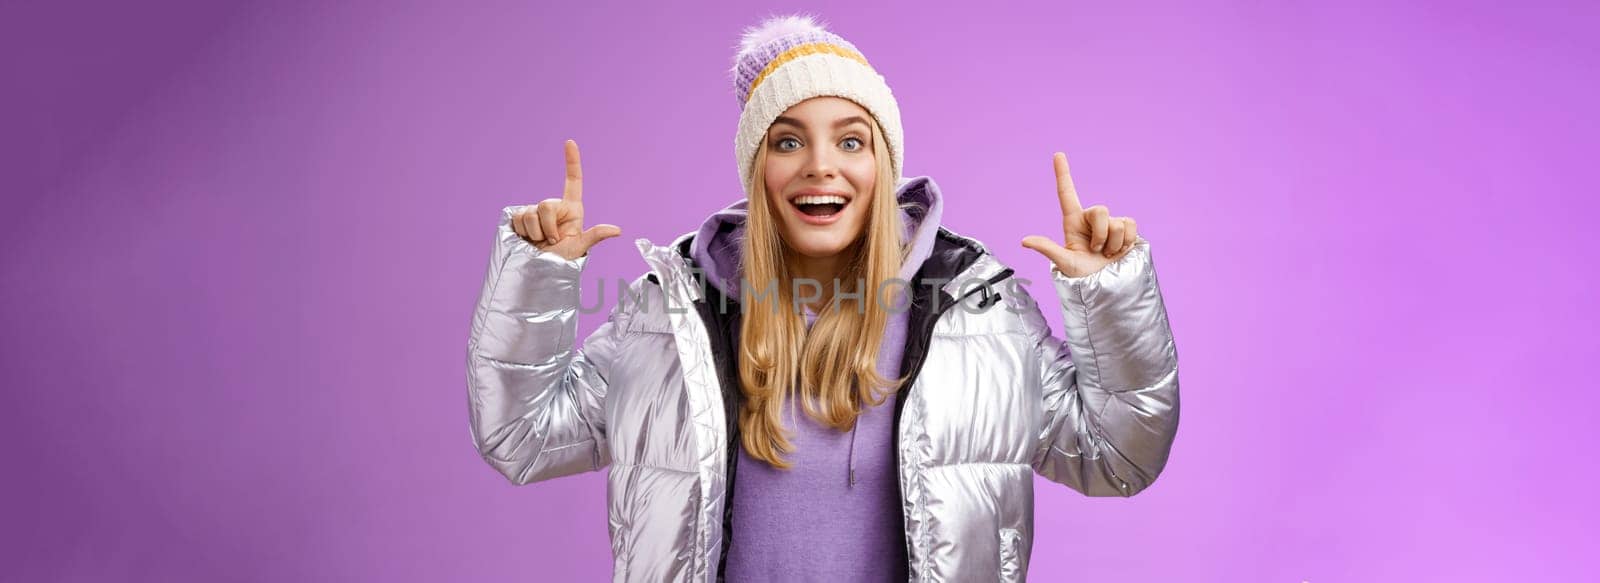 Lifestyle. Excited carefree cheerful fair-haired european girl in silver jacket winter hat raising hands pointing up have excellent idea smiling broadly speaking passionately standing purple background.